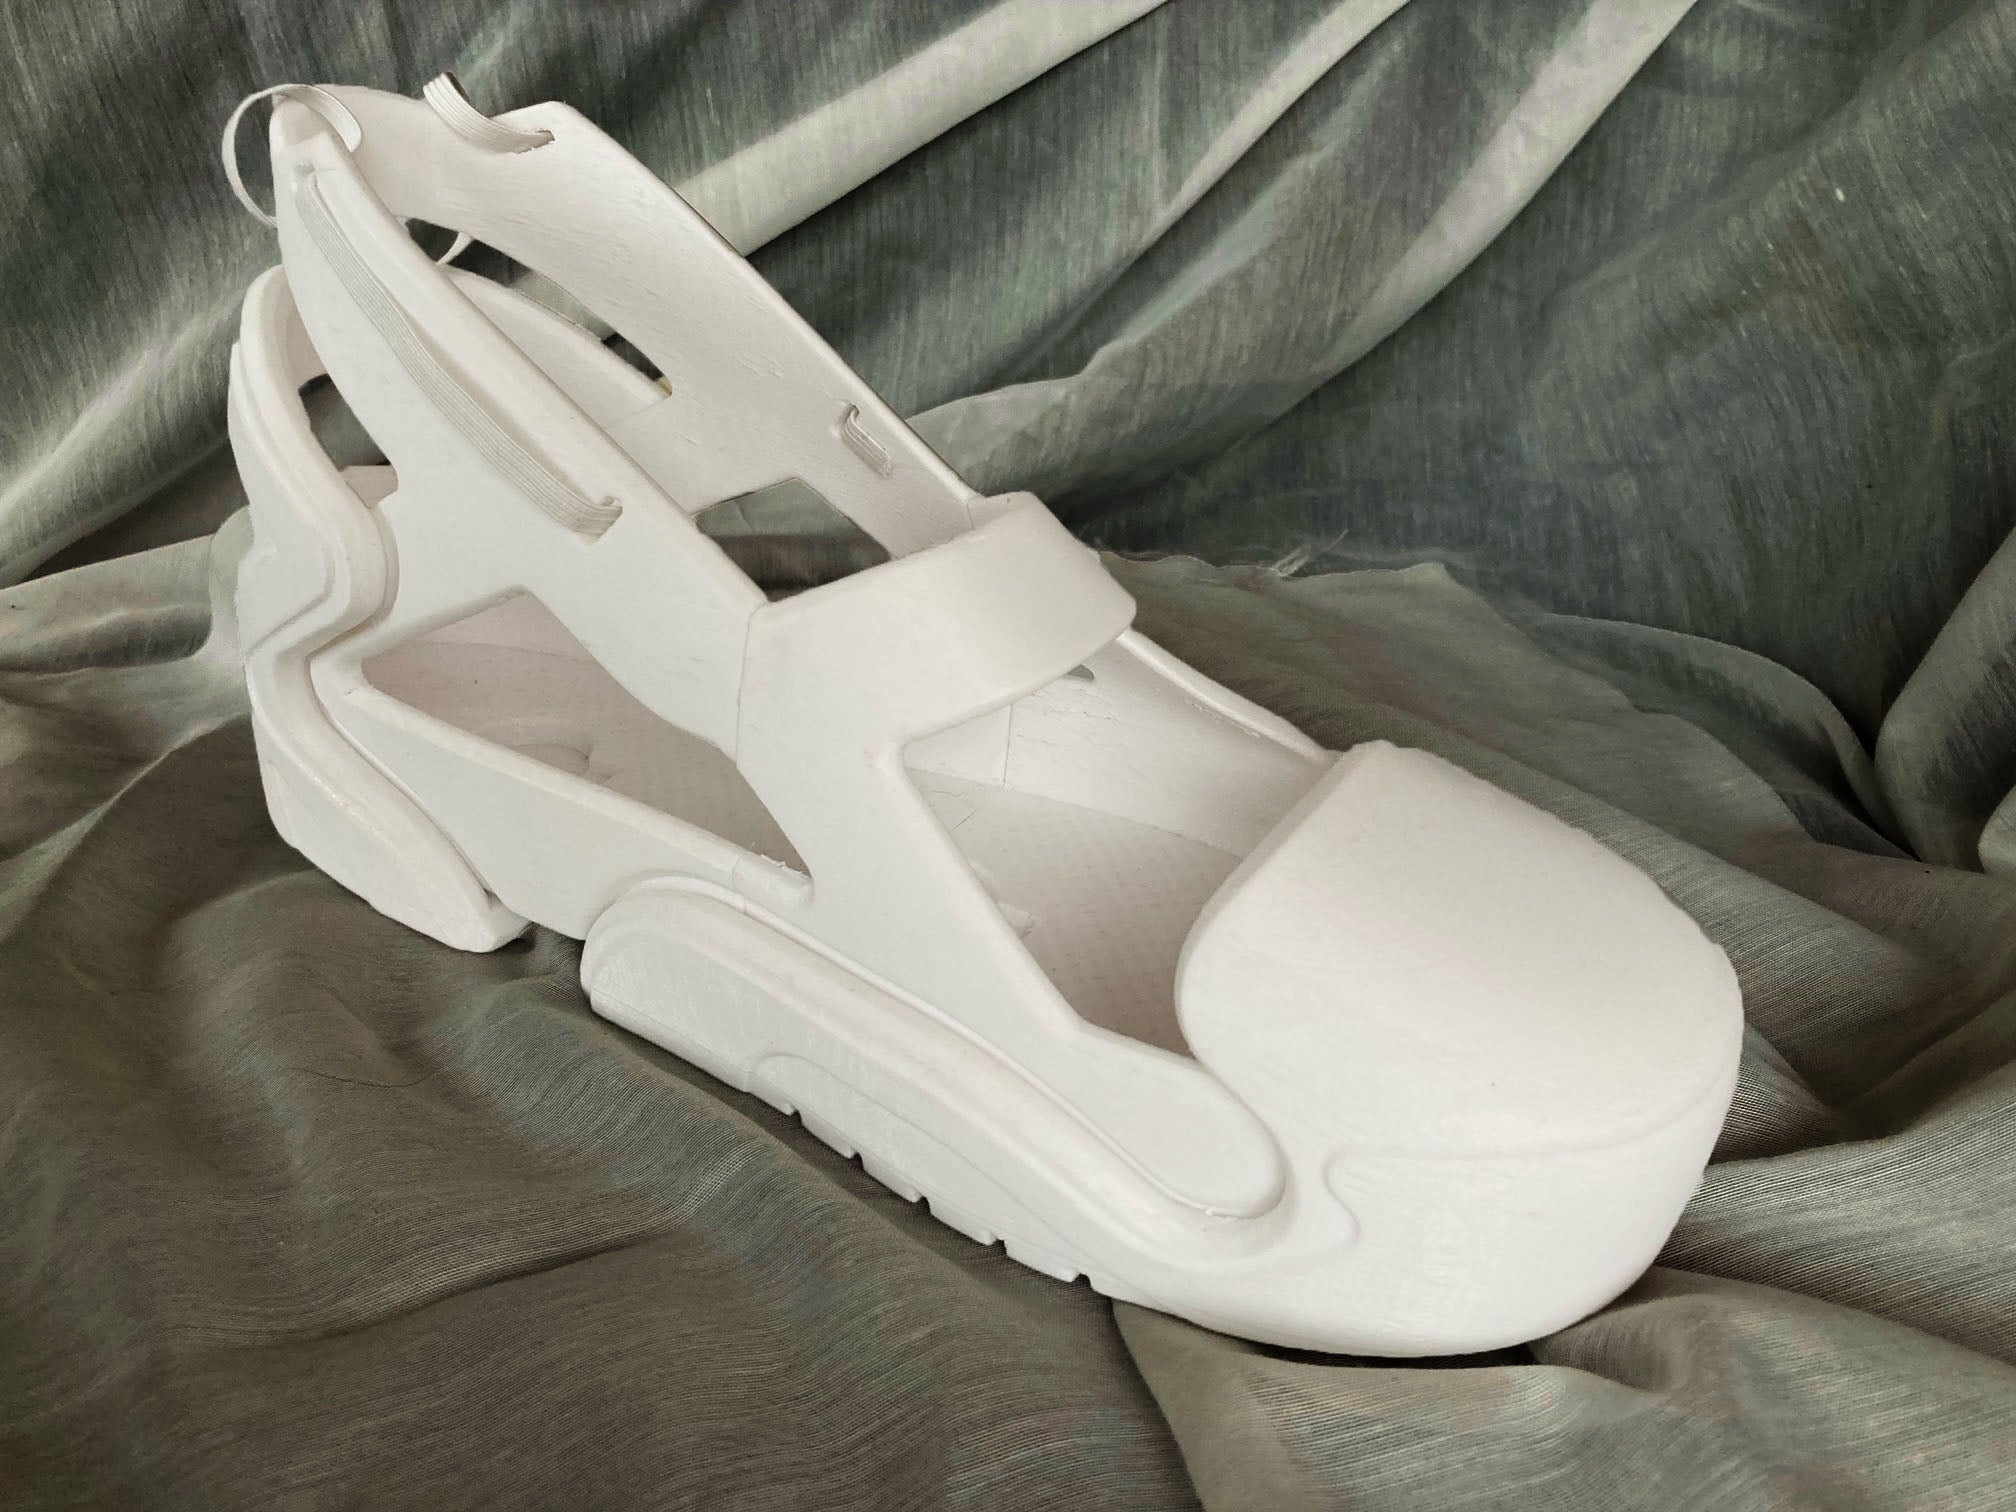 A 3D printed prototype of a modular shoe sits on gray fabric